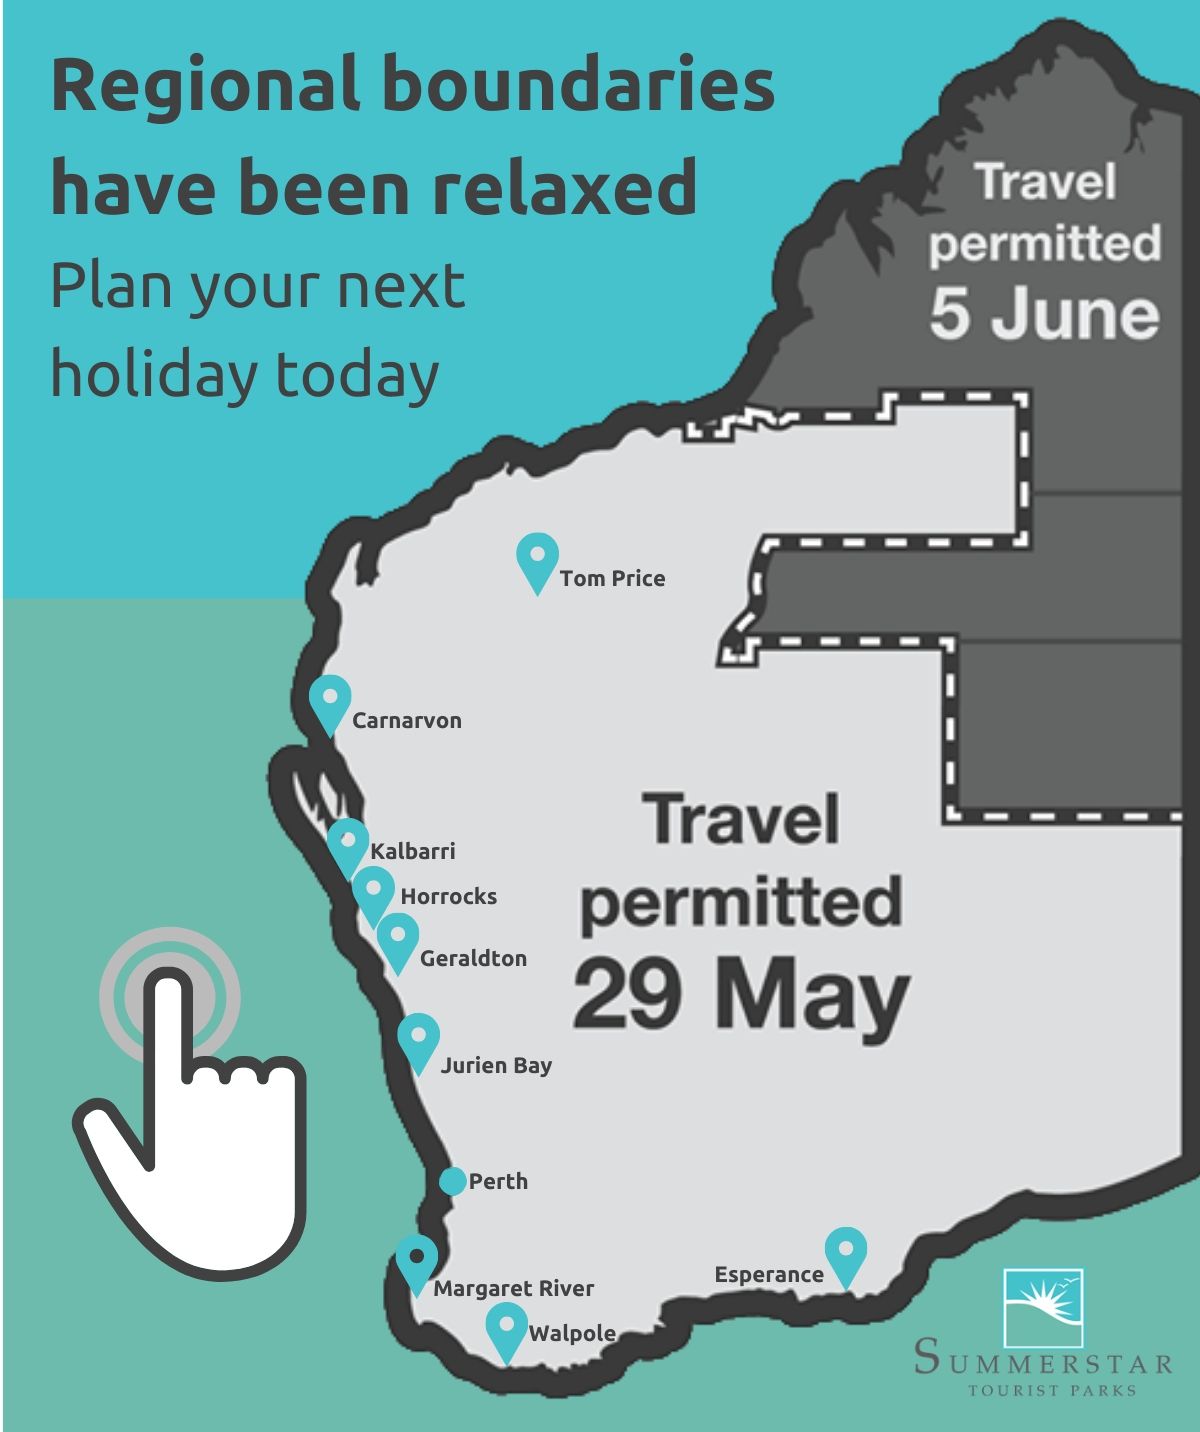 changes to regional travel may 29th